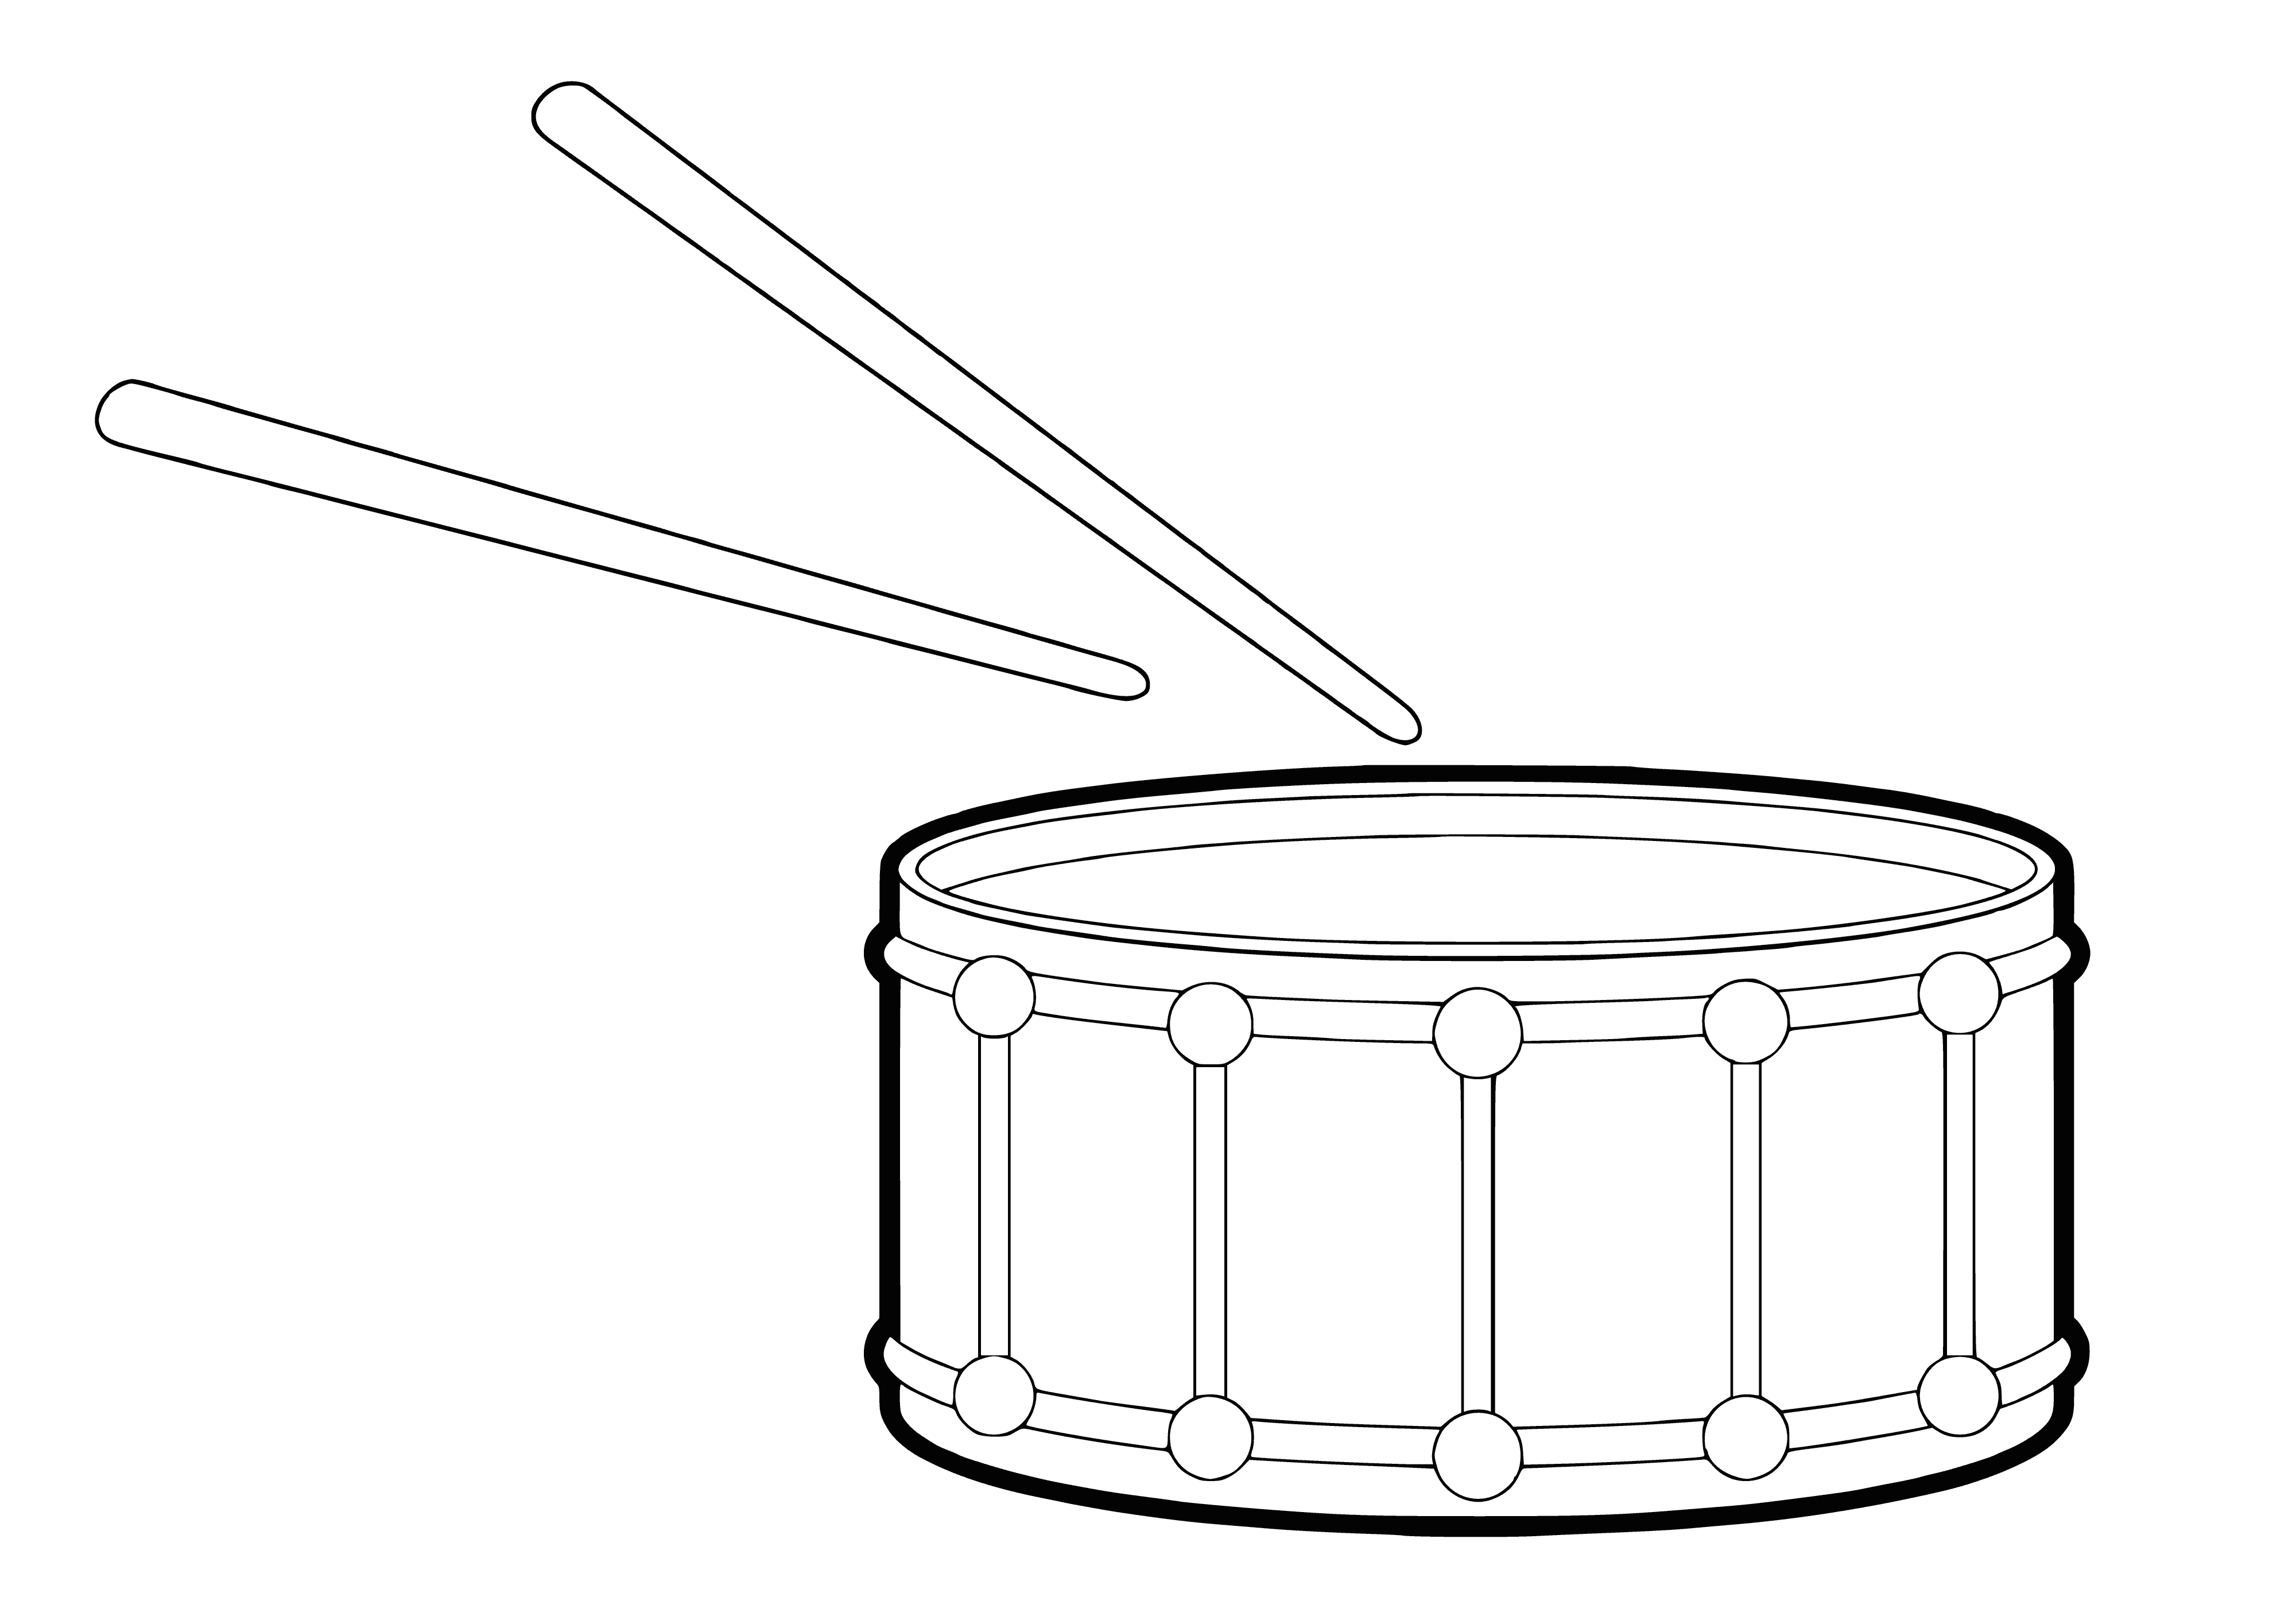 coloring page: Coloring page shows drums with sound waves emanating from them; 3 drums of different sizes and one cymbal in center. All striped in different colors.